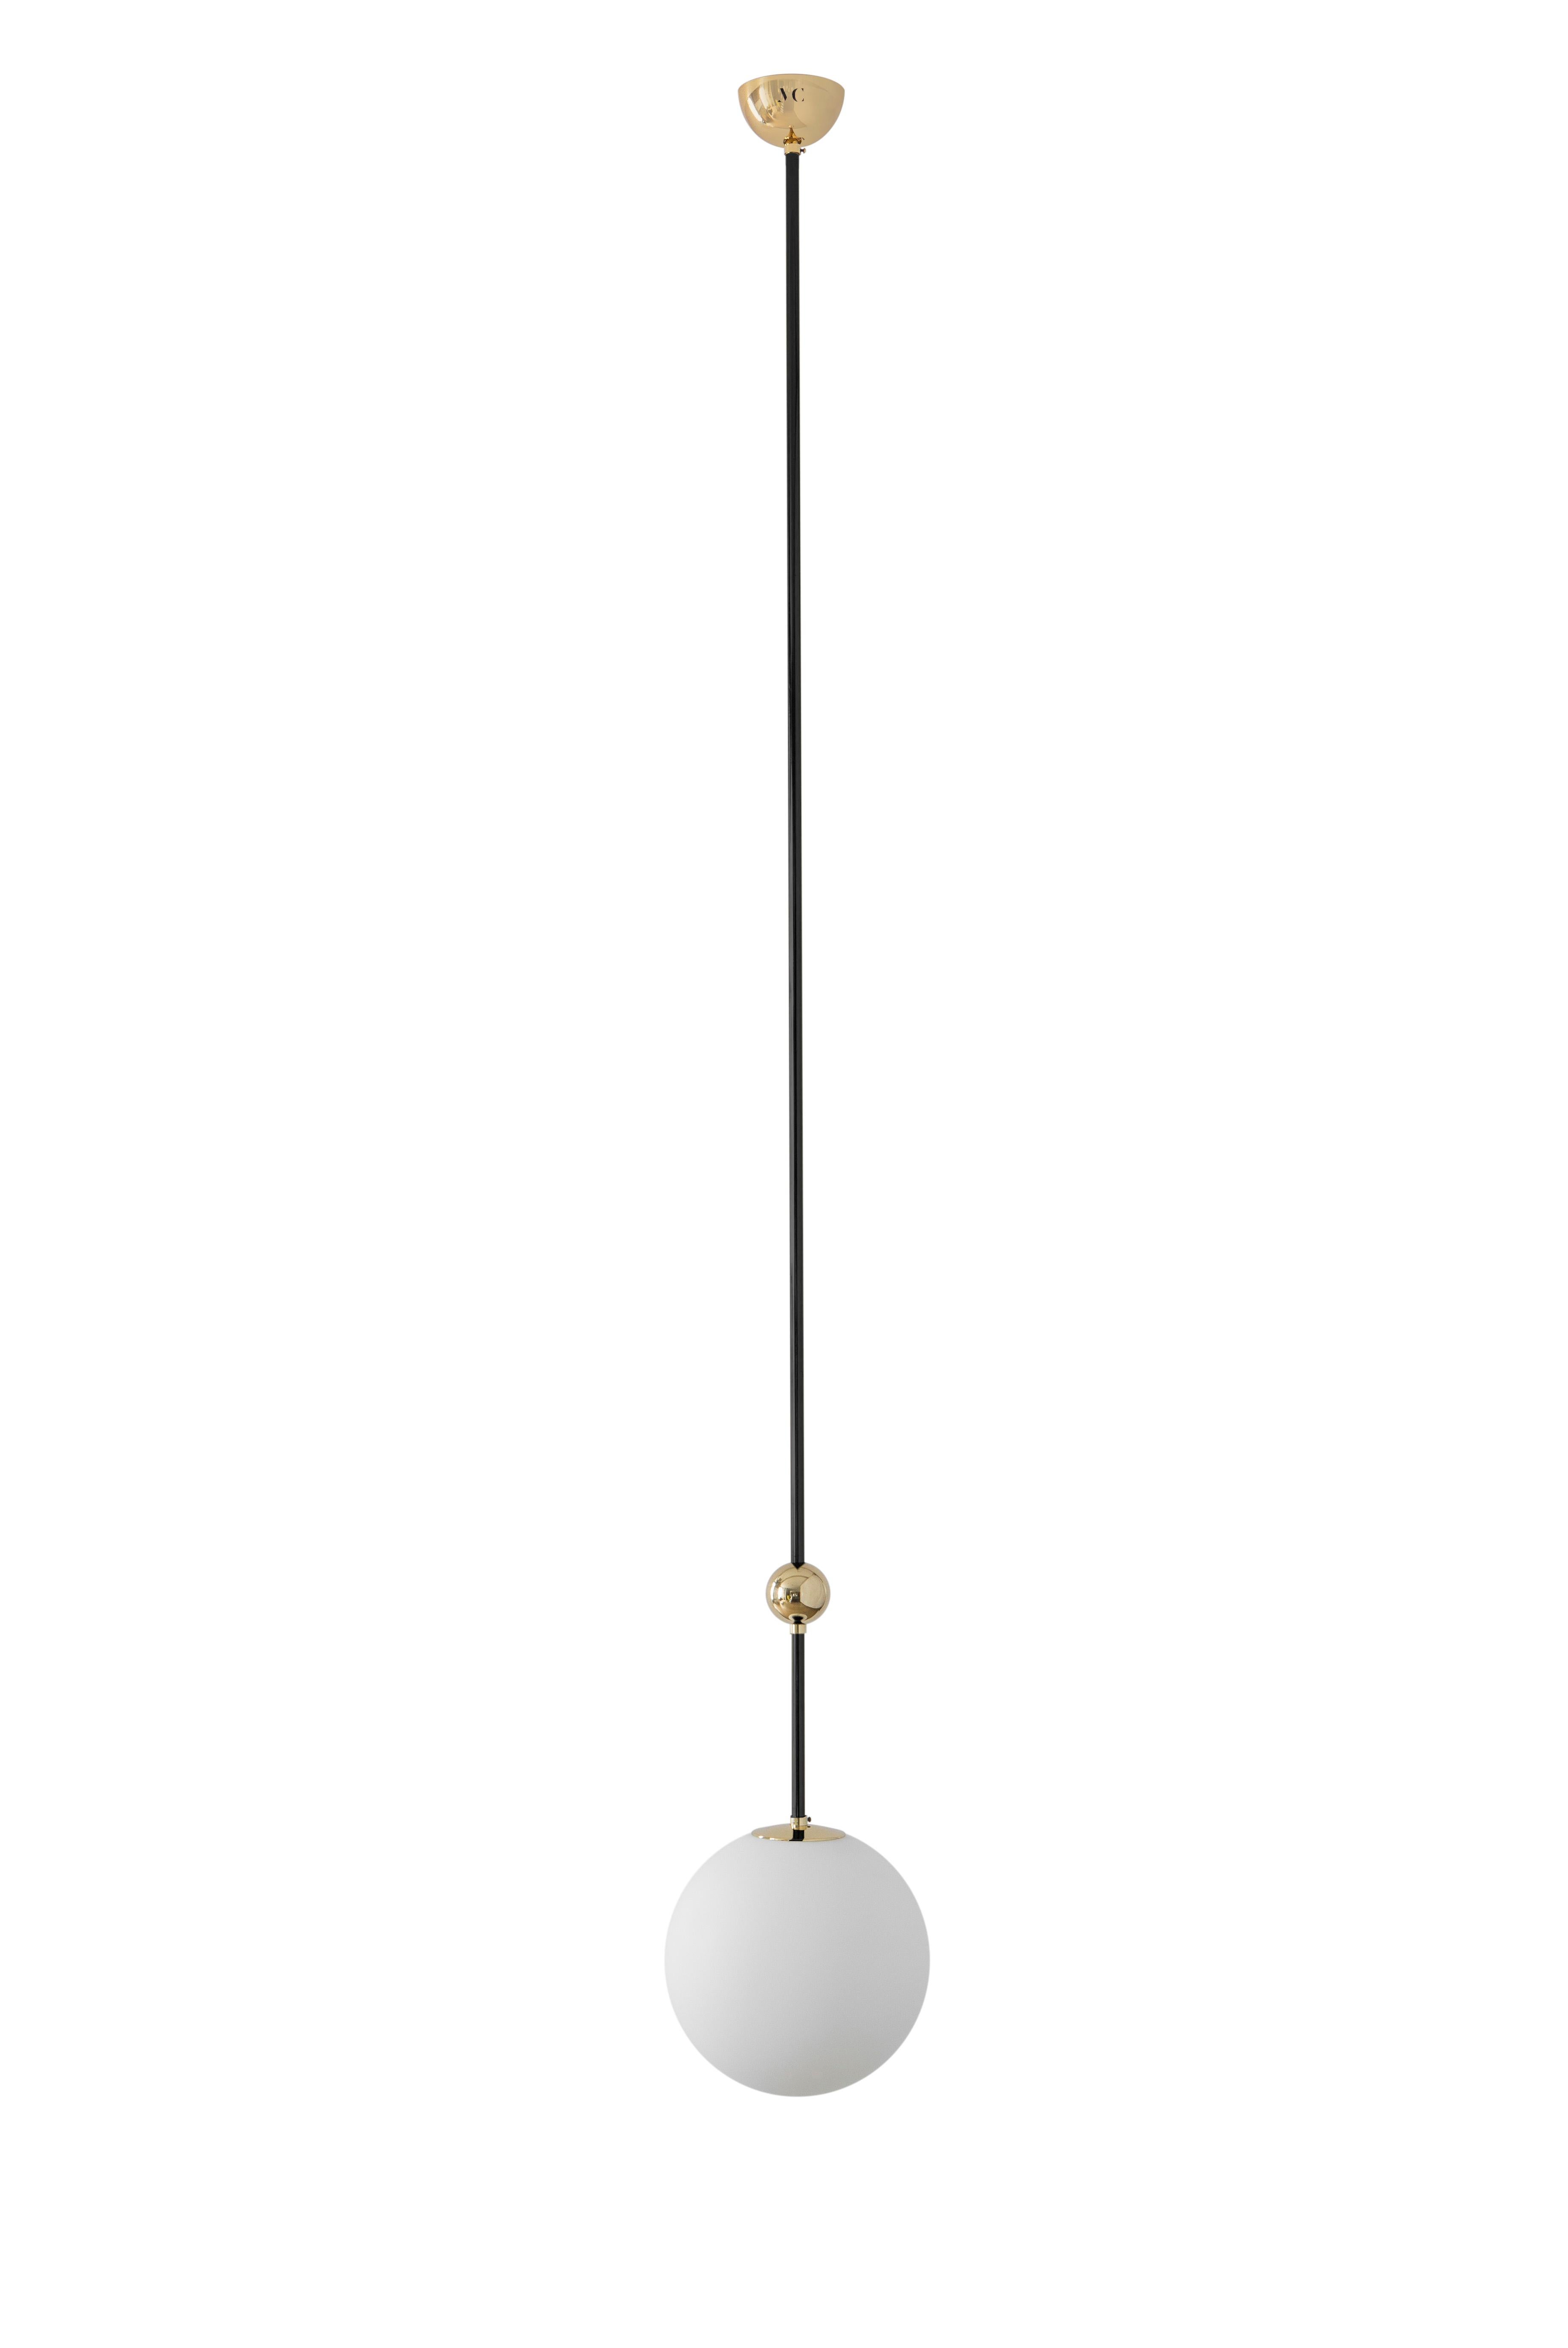 Pendant 02 black by Magic Circus Editions
Dimensions: D 25 x W 25 x H 175 cm, also available in H 90, 110, 130, 150, 190 cm
Materials: brass, mouth blown glass

All our lamps can be wired according to each country. If sold to the USA it will be